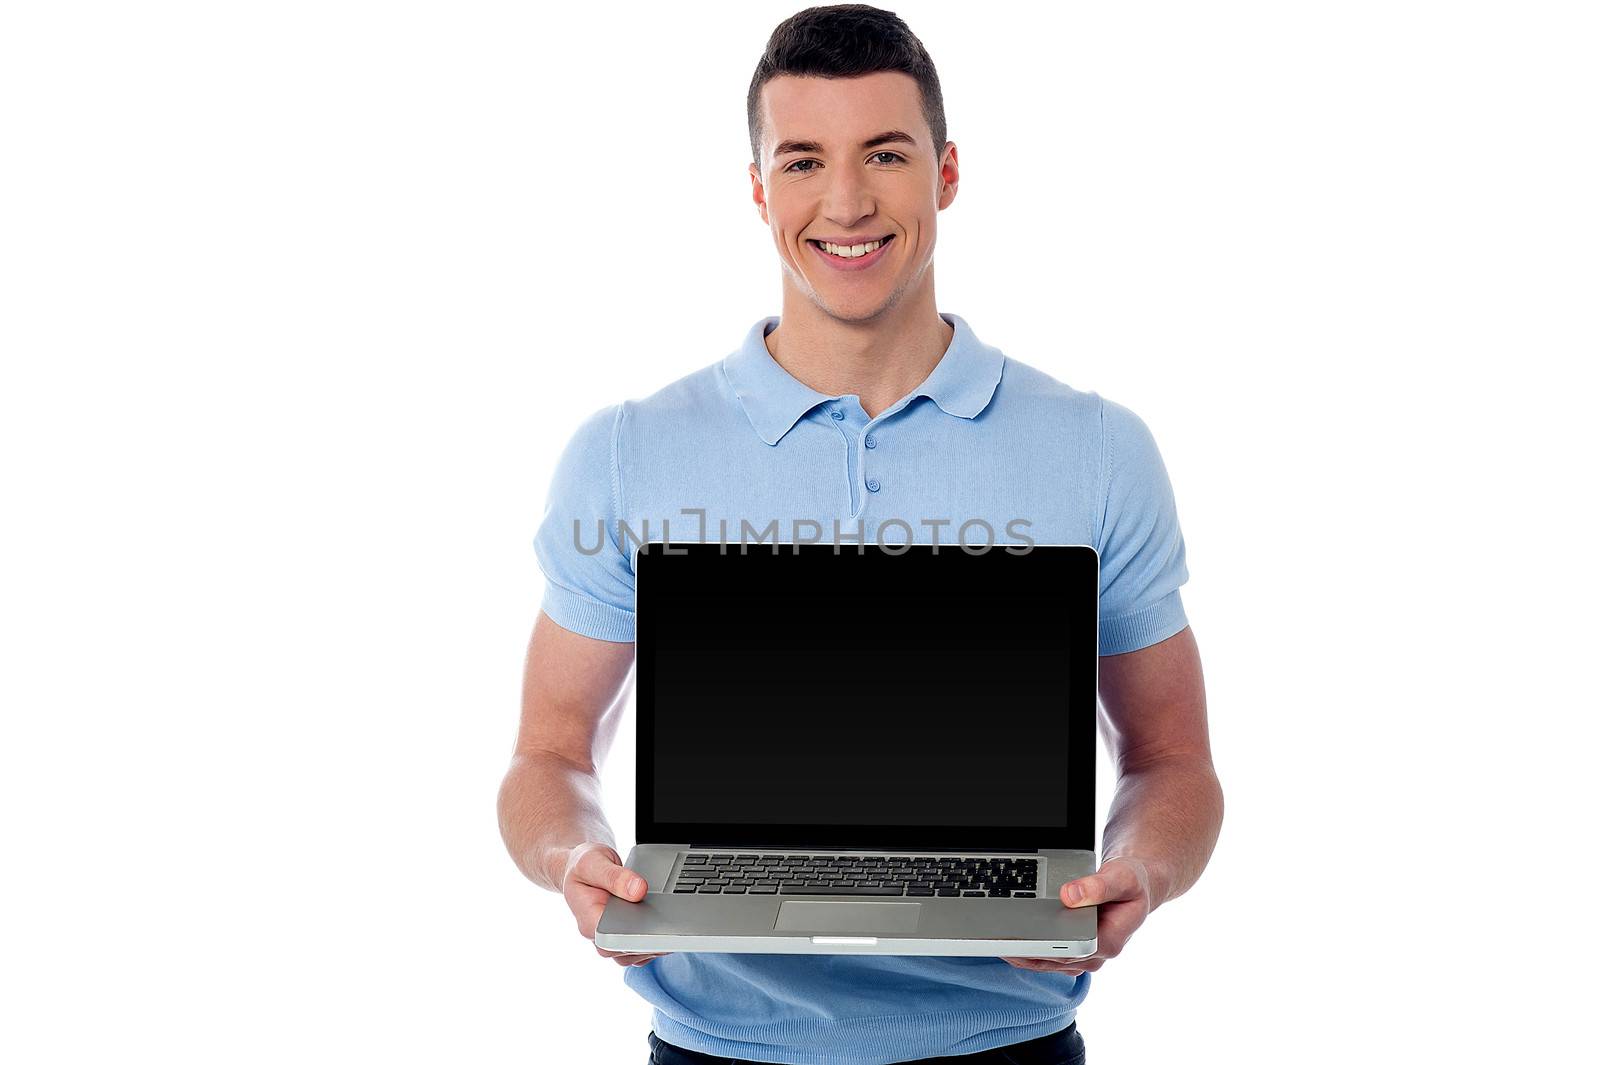 The brand new laptop is out for sale by stockyimages